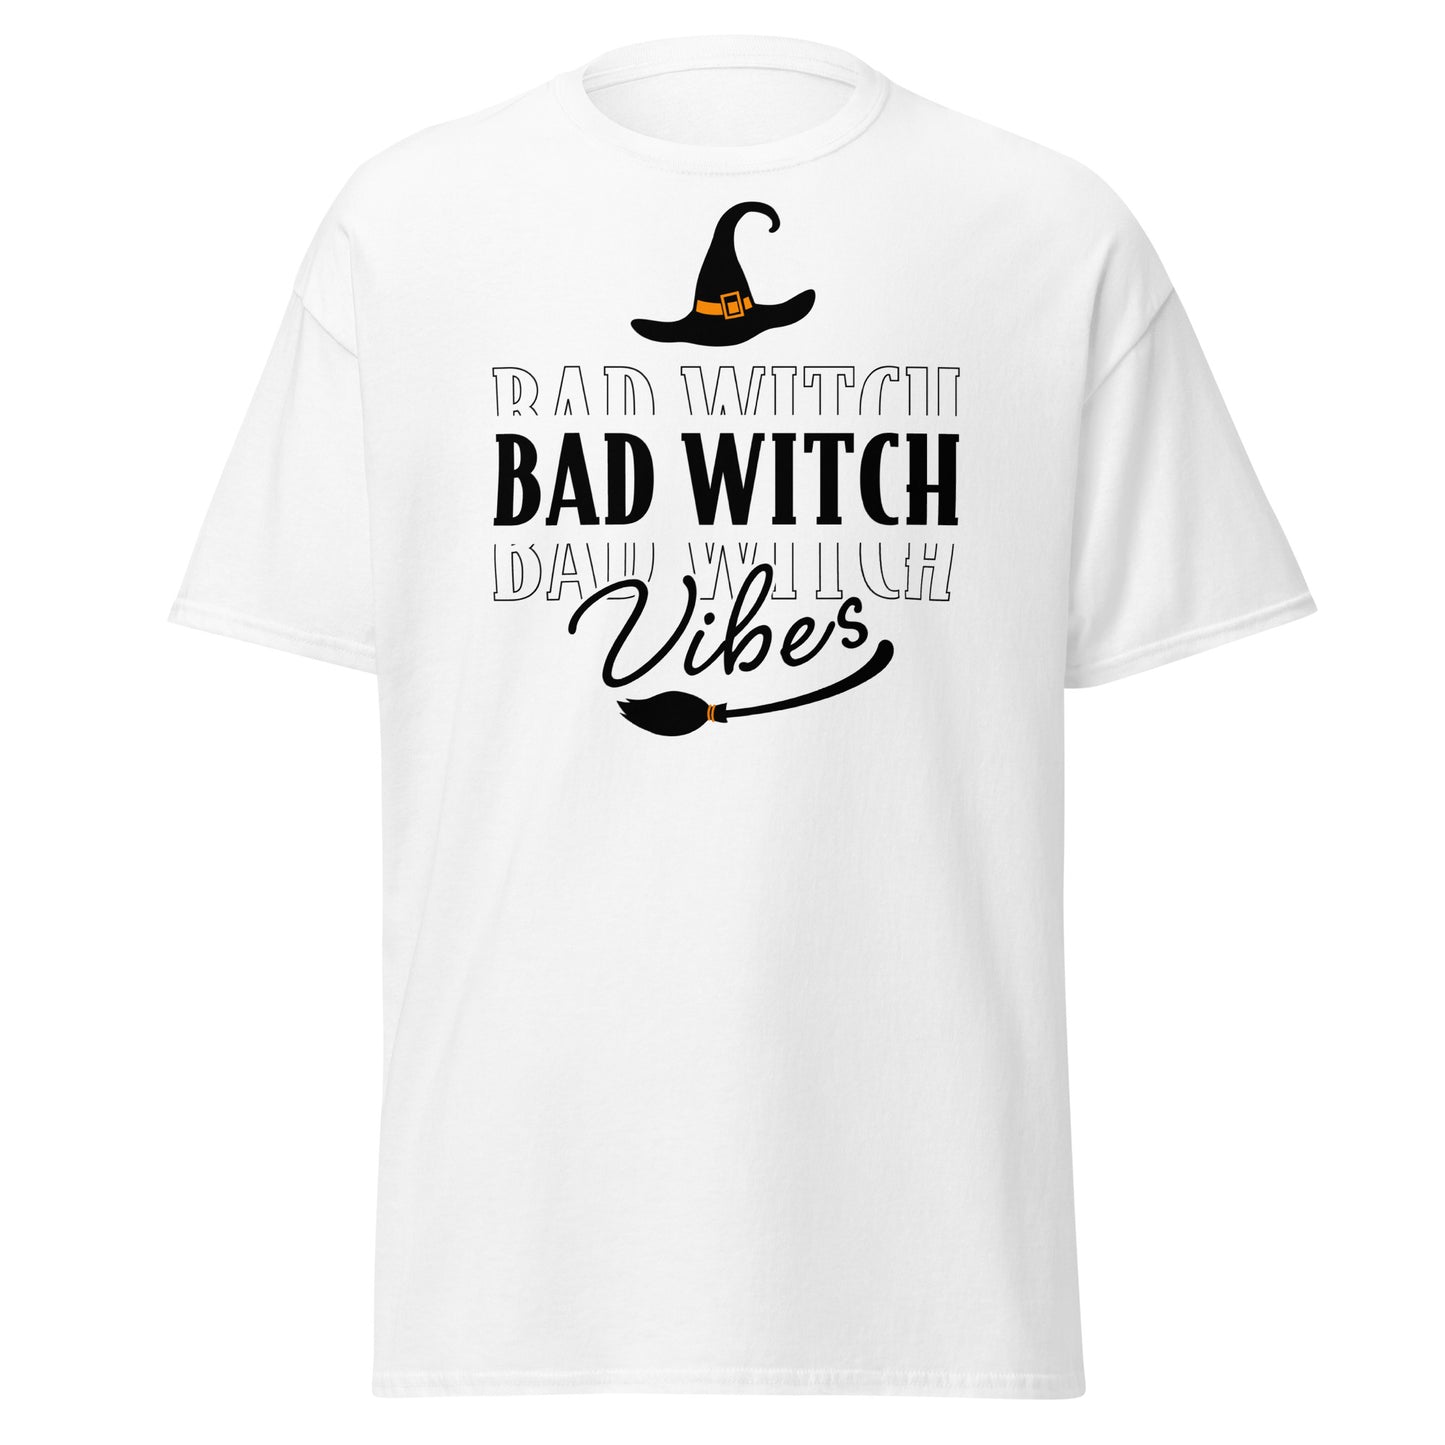 Bad Witch Vibes' Tee: Embrace the Dark Magic this Halloween